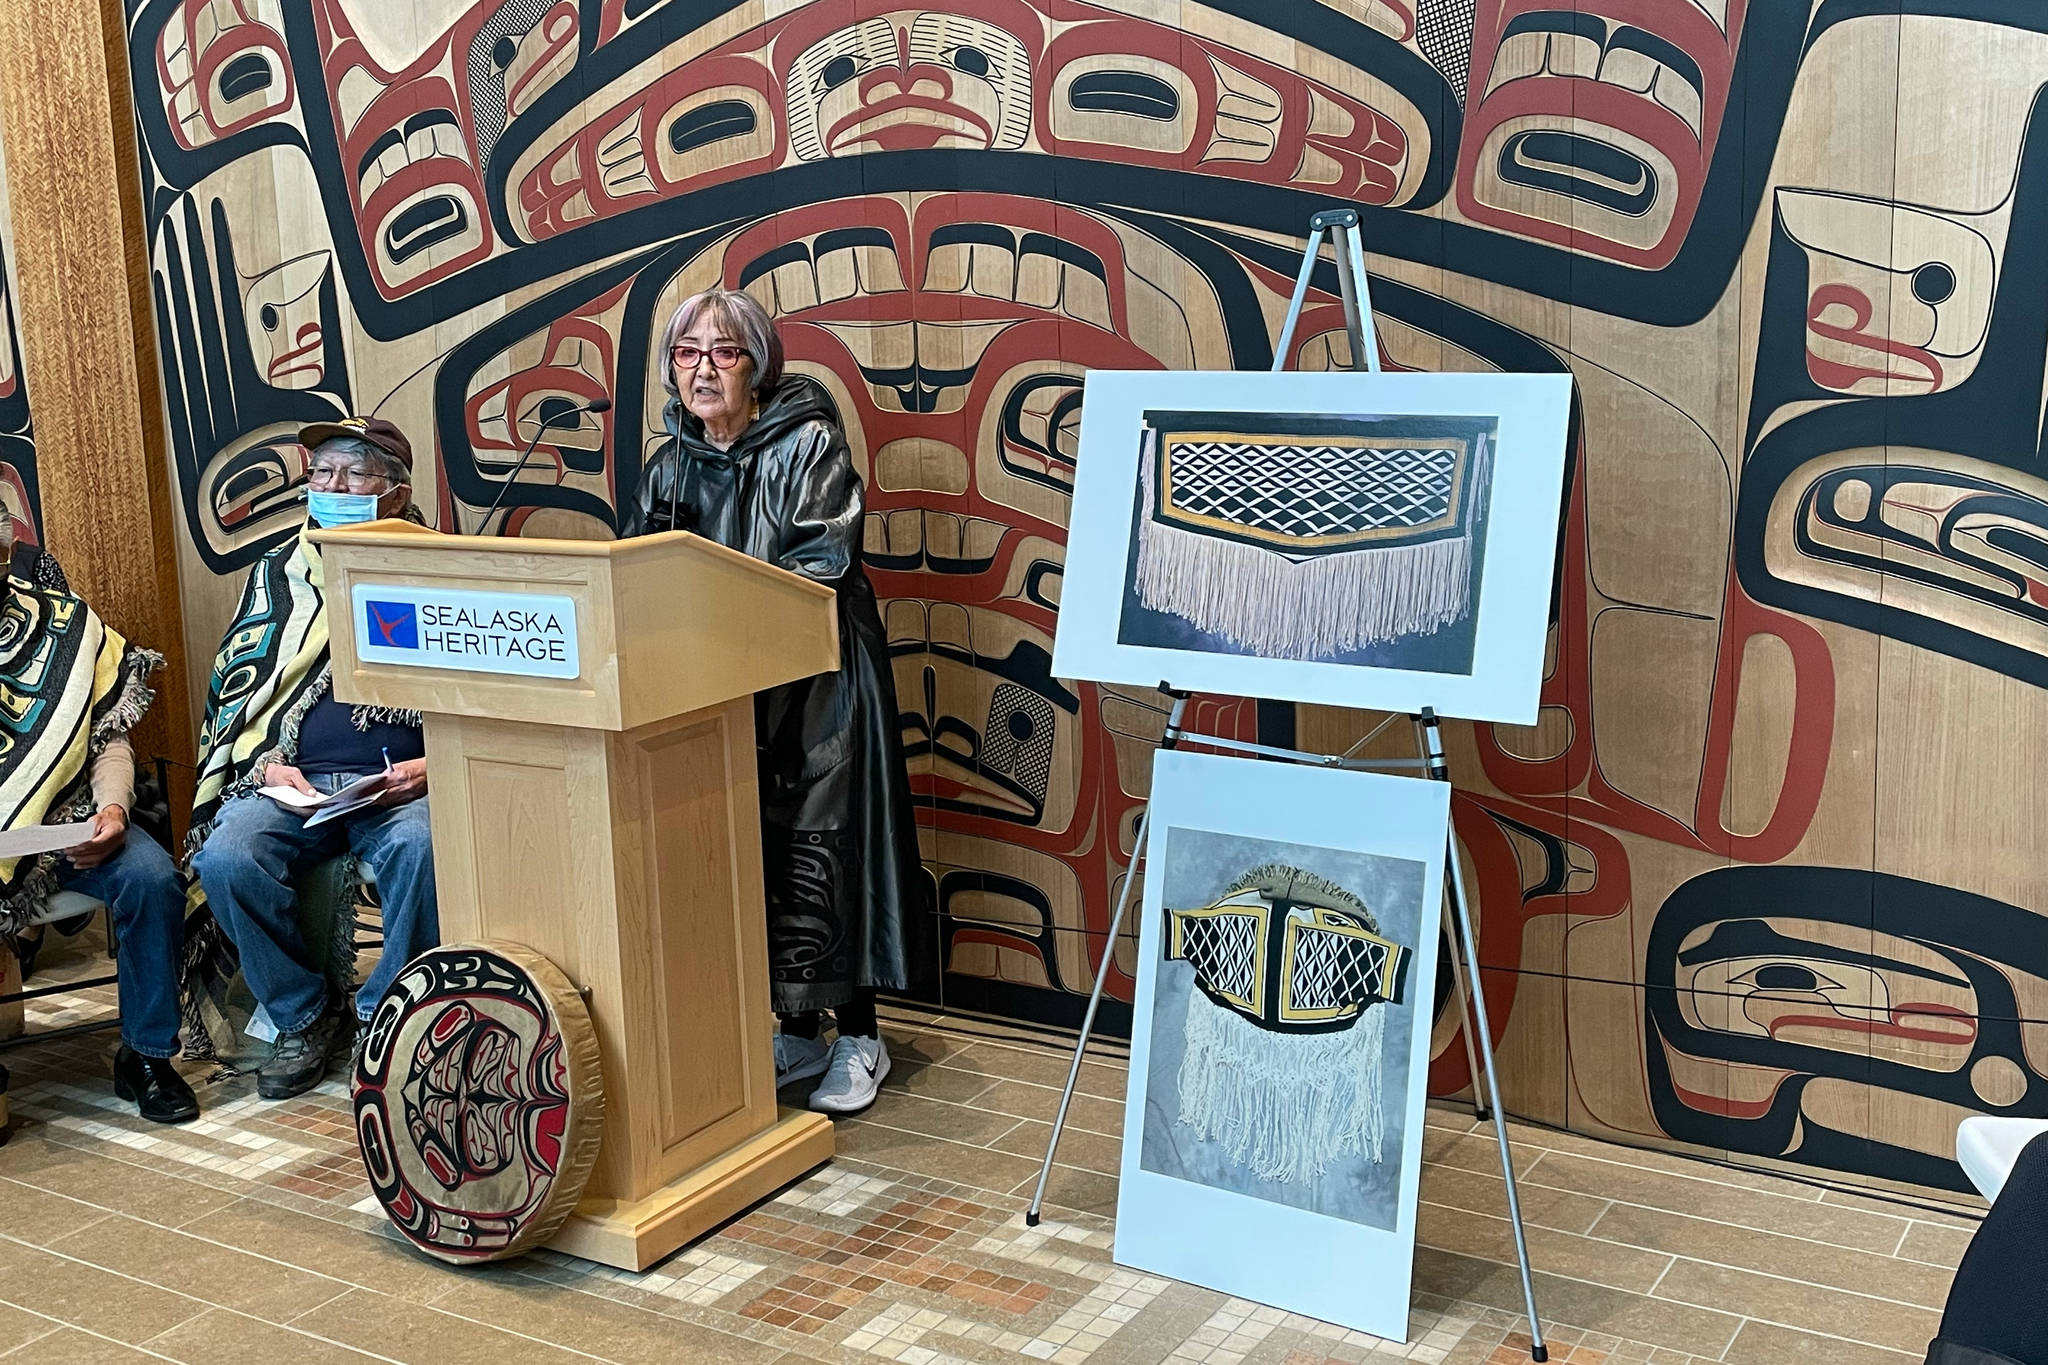 Michael S. Lockett / Juneau Empire
Rosita Worl, president of the Sealaska Heritage Institute, speaks during a ceremony commemorating the settlement of an intellectual property lawsuit against a fashion company on Friday, Aug. 13, 2021.